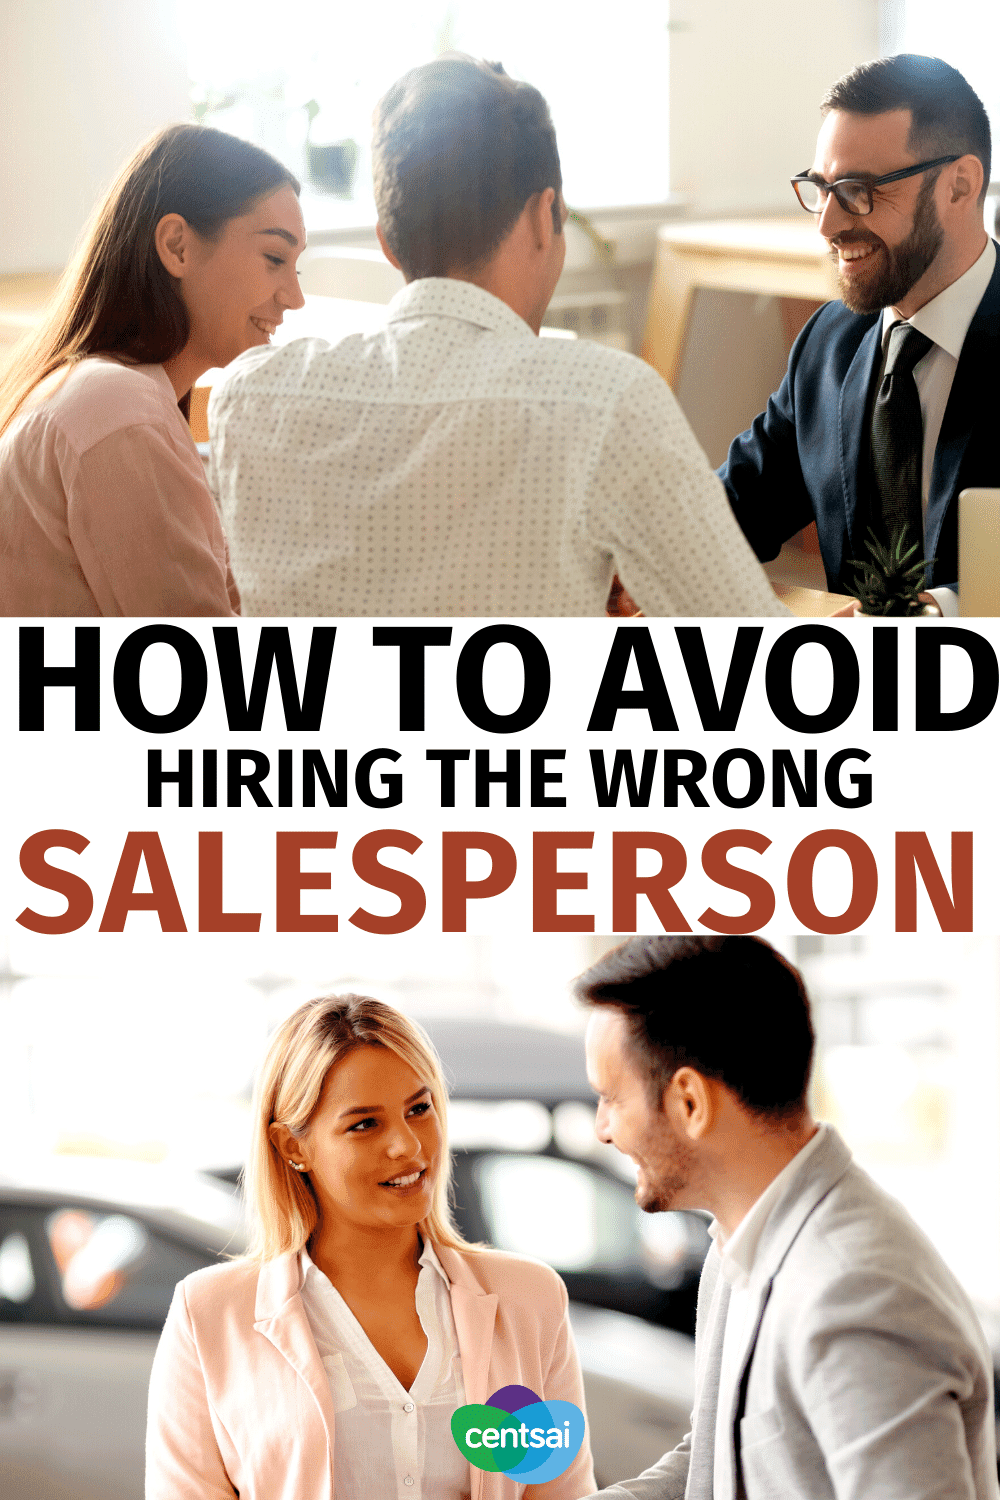 How to Avoid Hiring the Wrong Salesperson